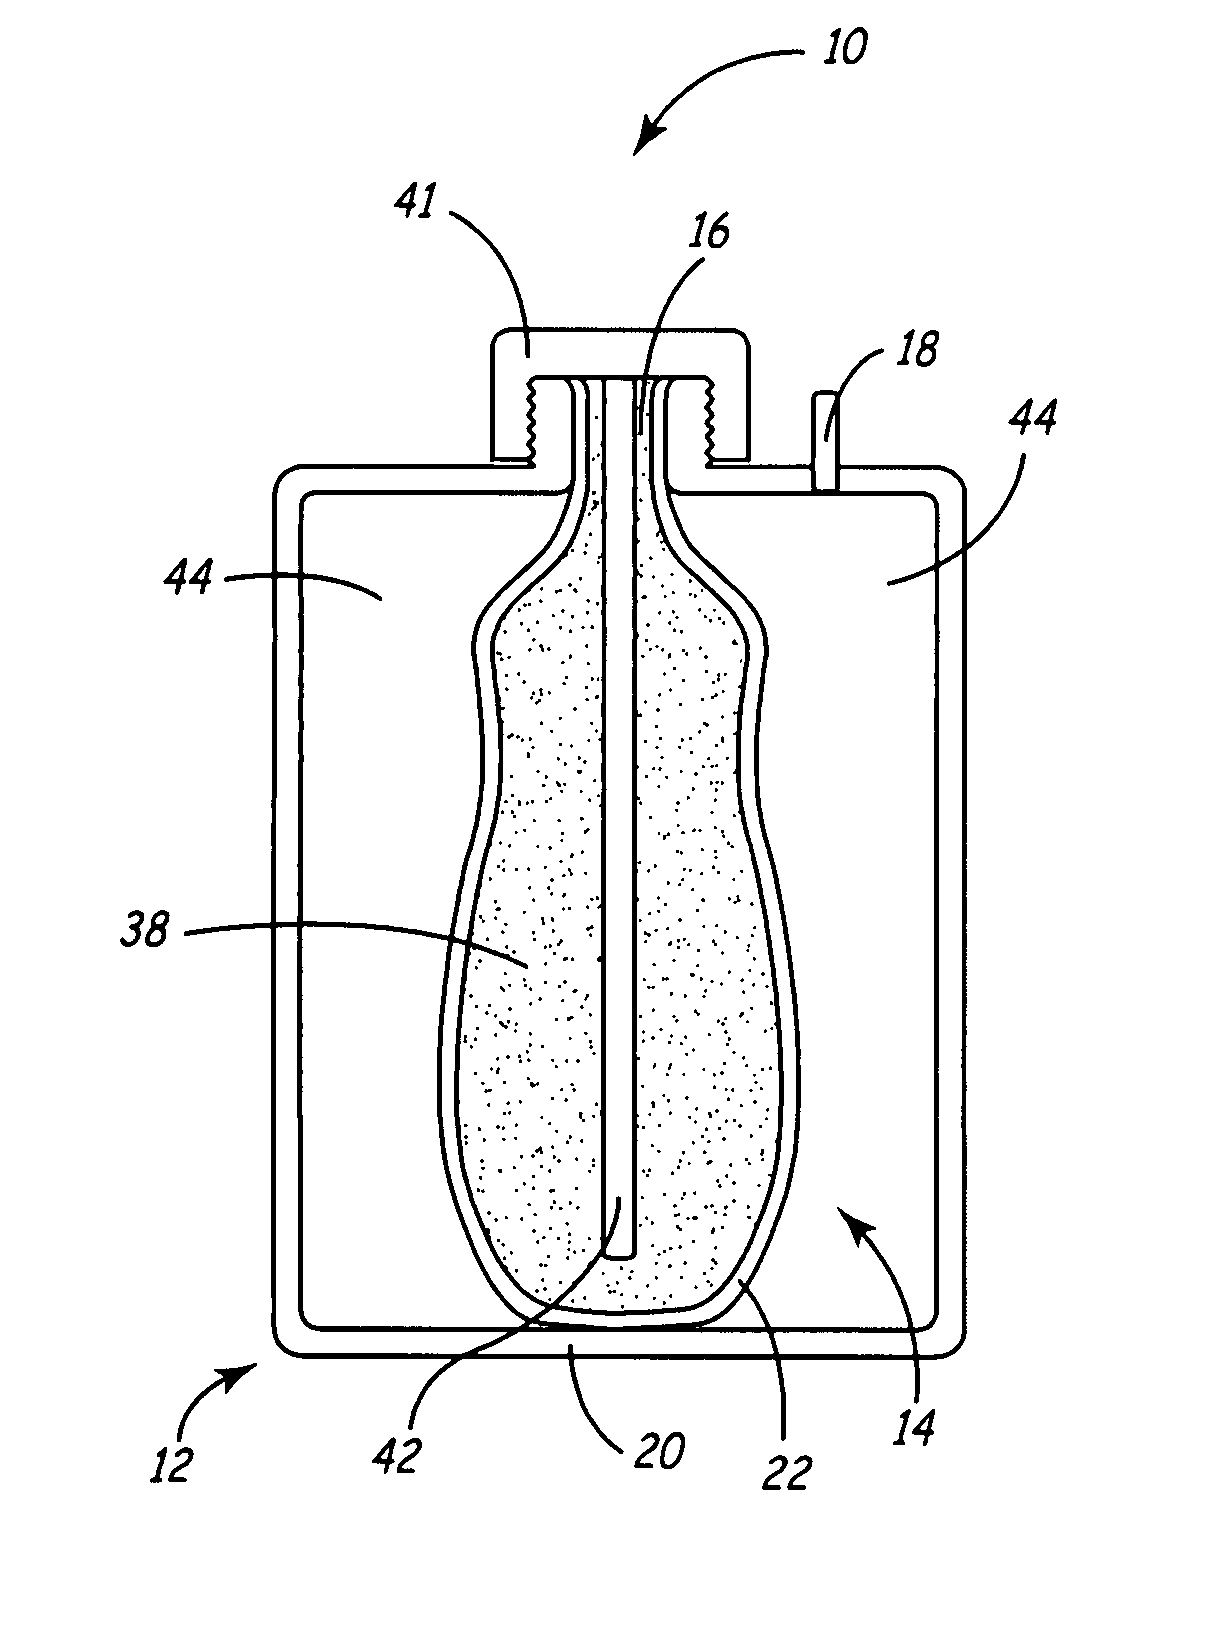 Blown bottle with intrinsic liner